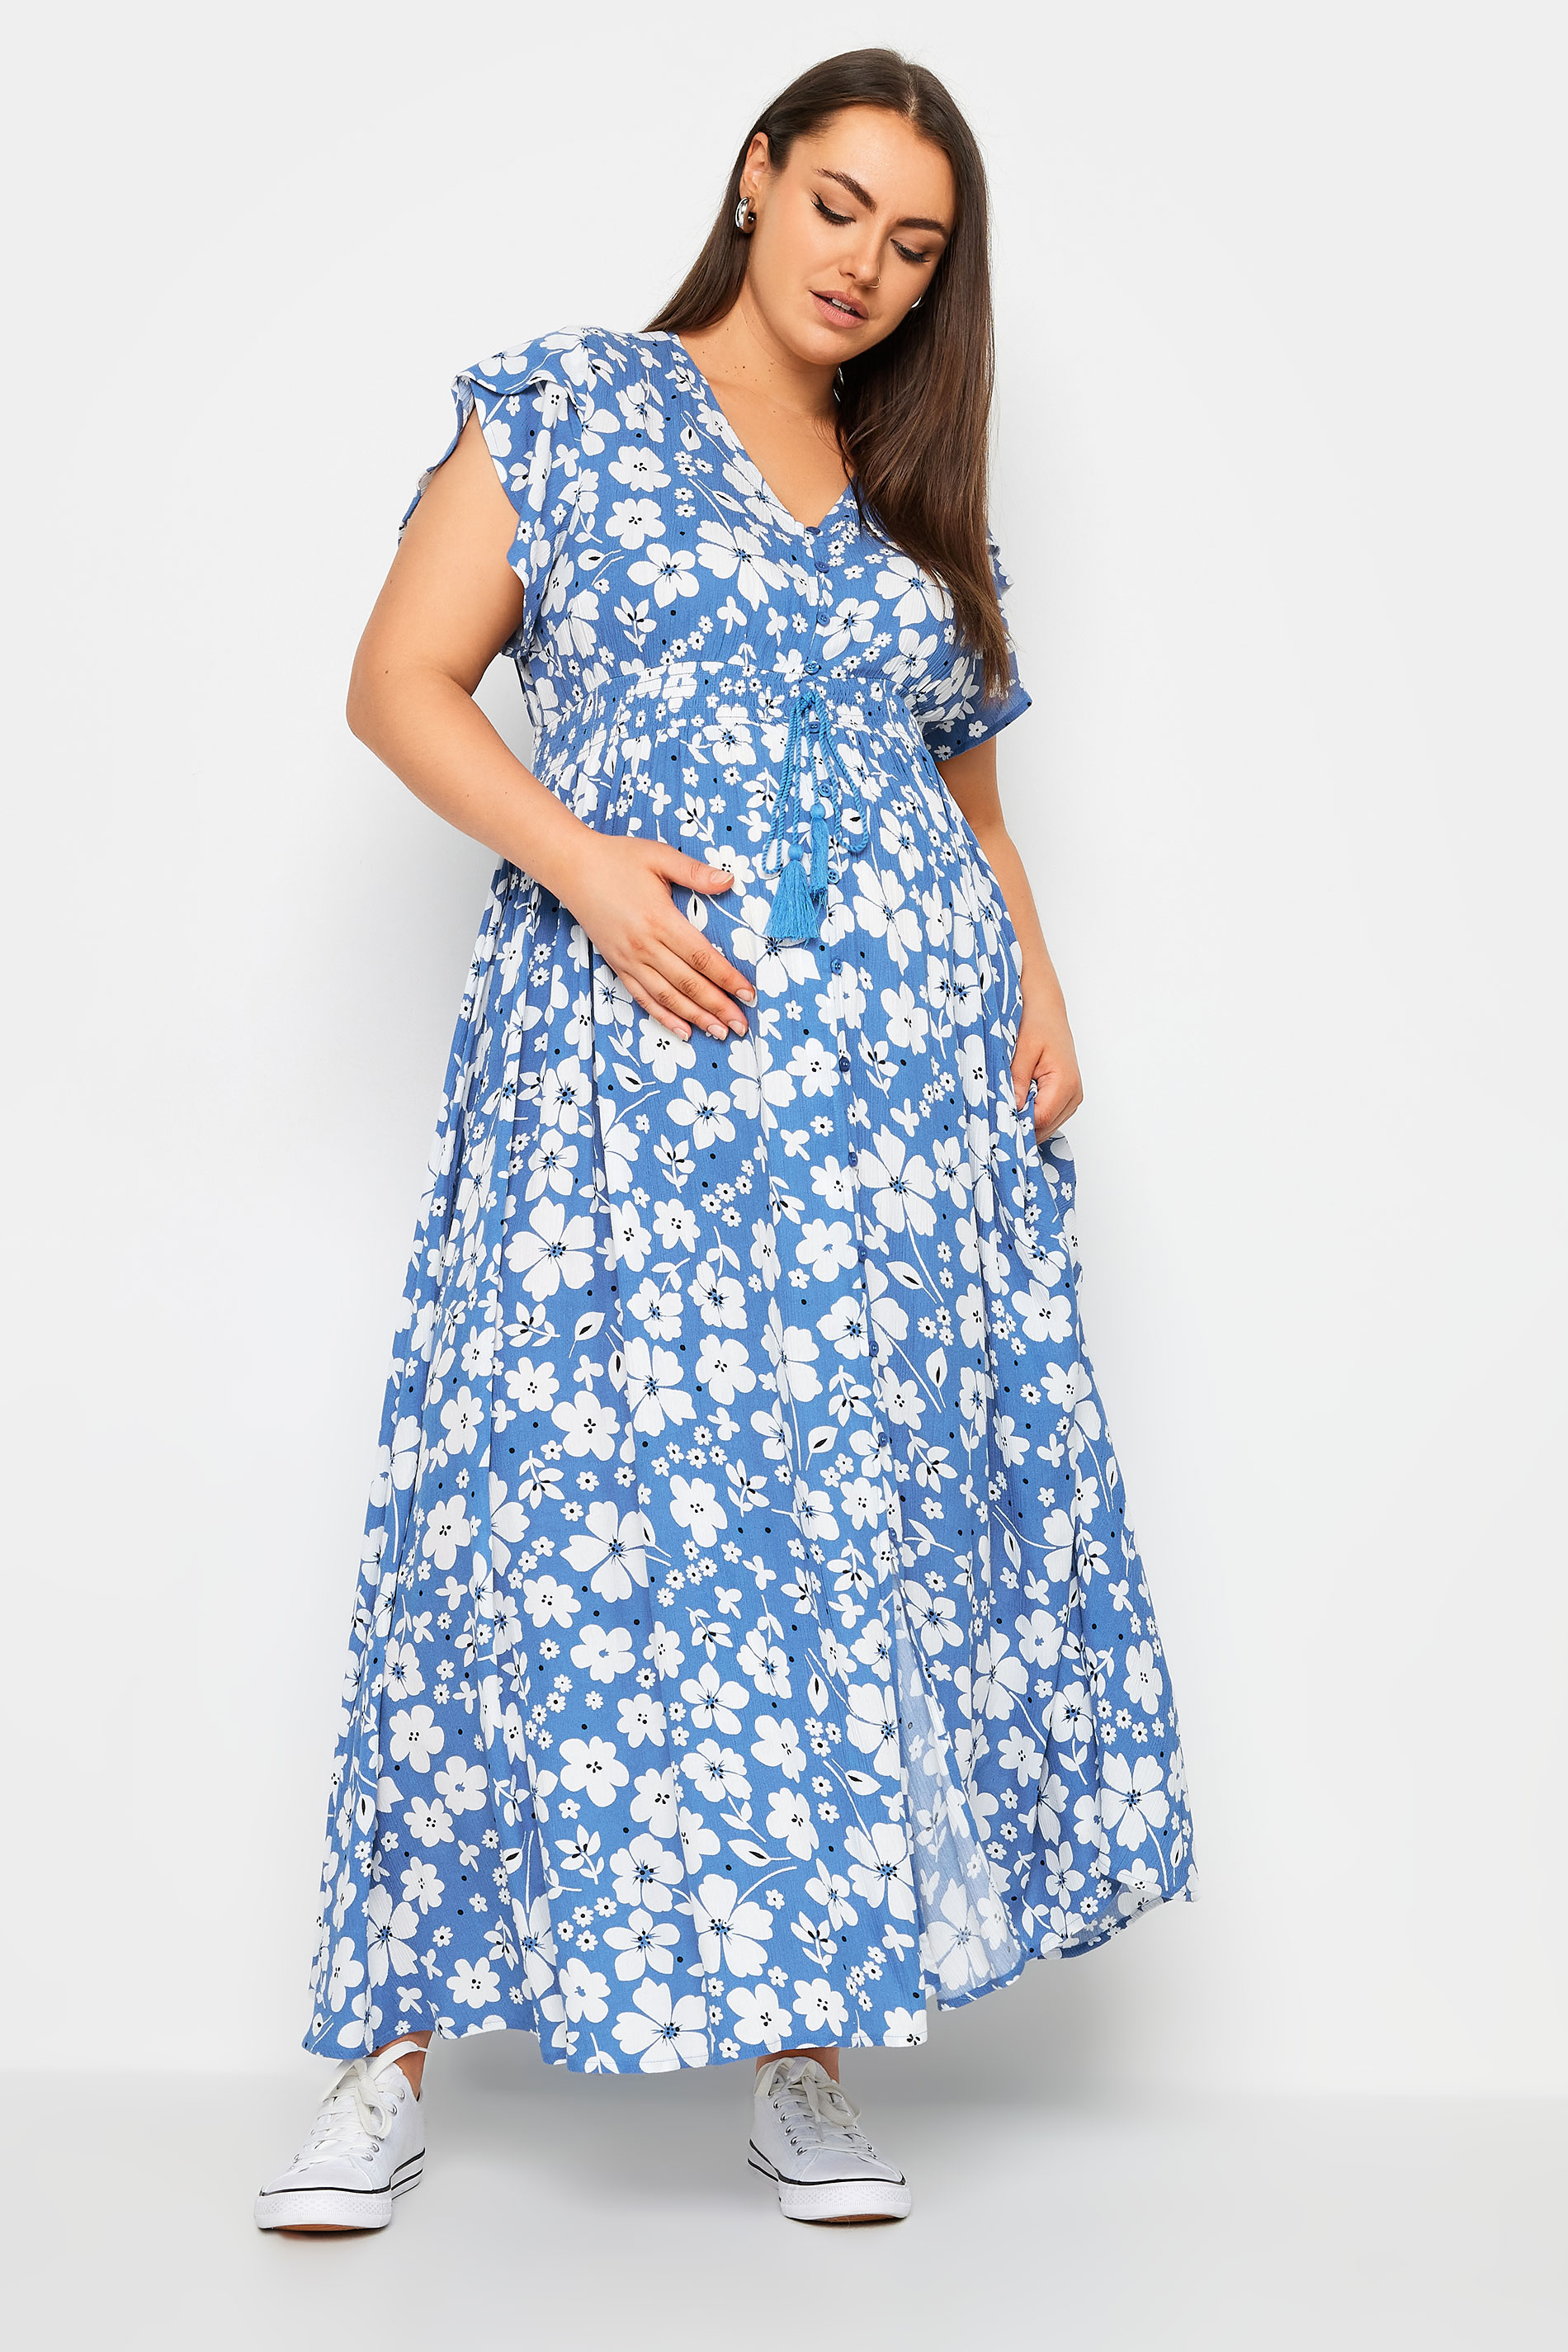 BUMP IT UP MATERNITY Plus Size Blue Floral Print Maxi Dress | Yours Clothing 3